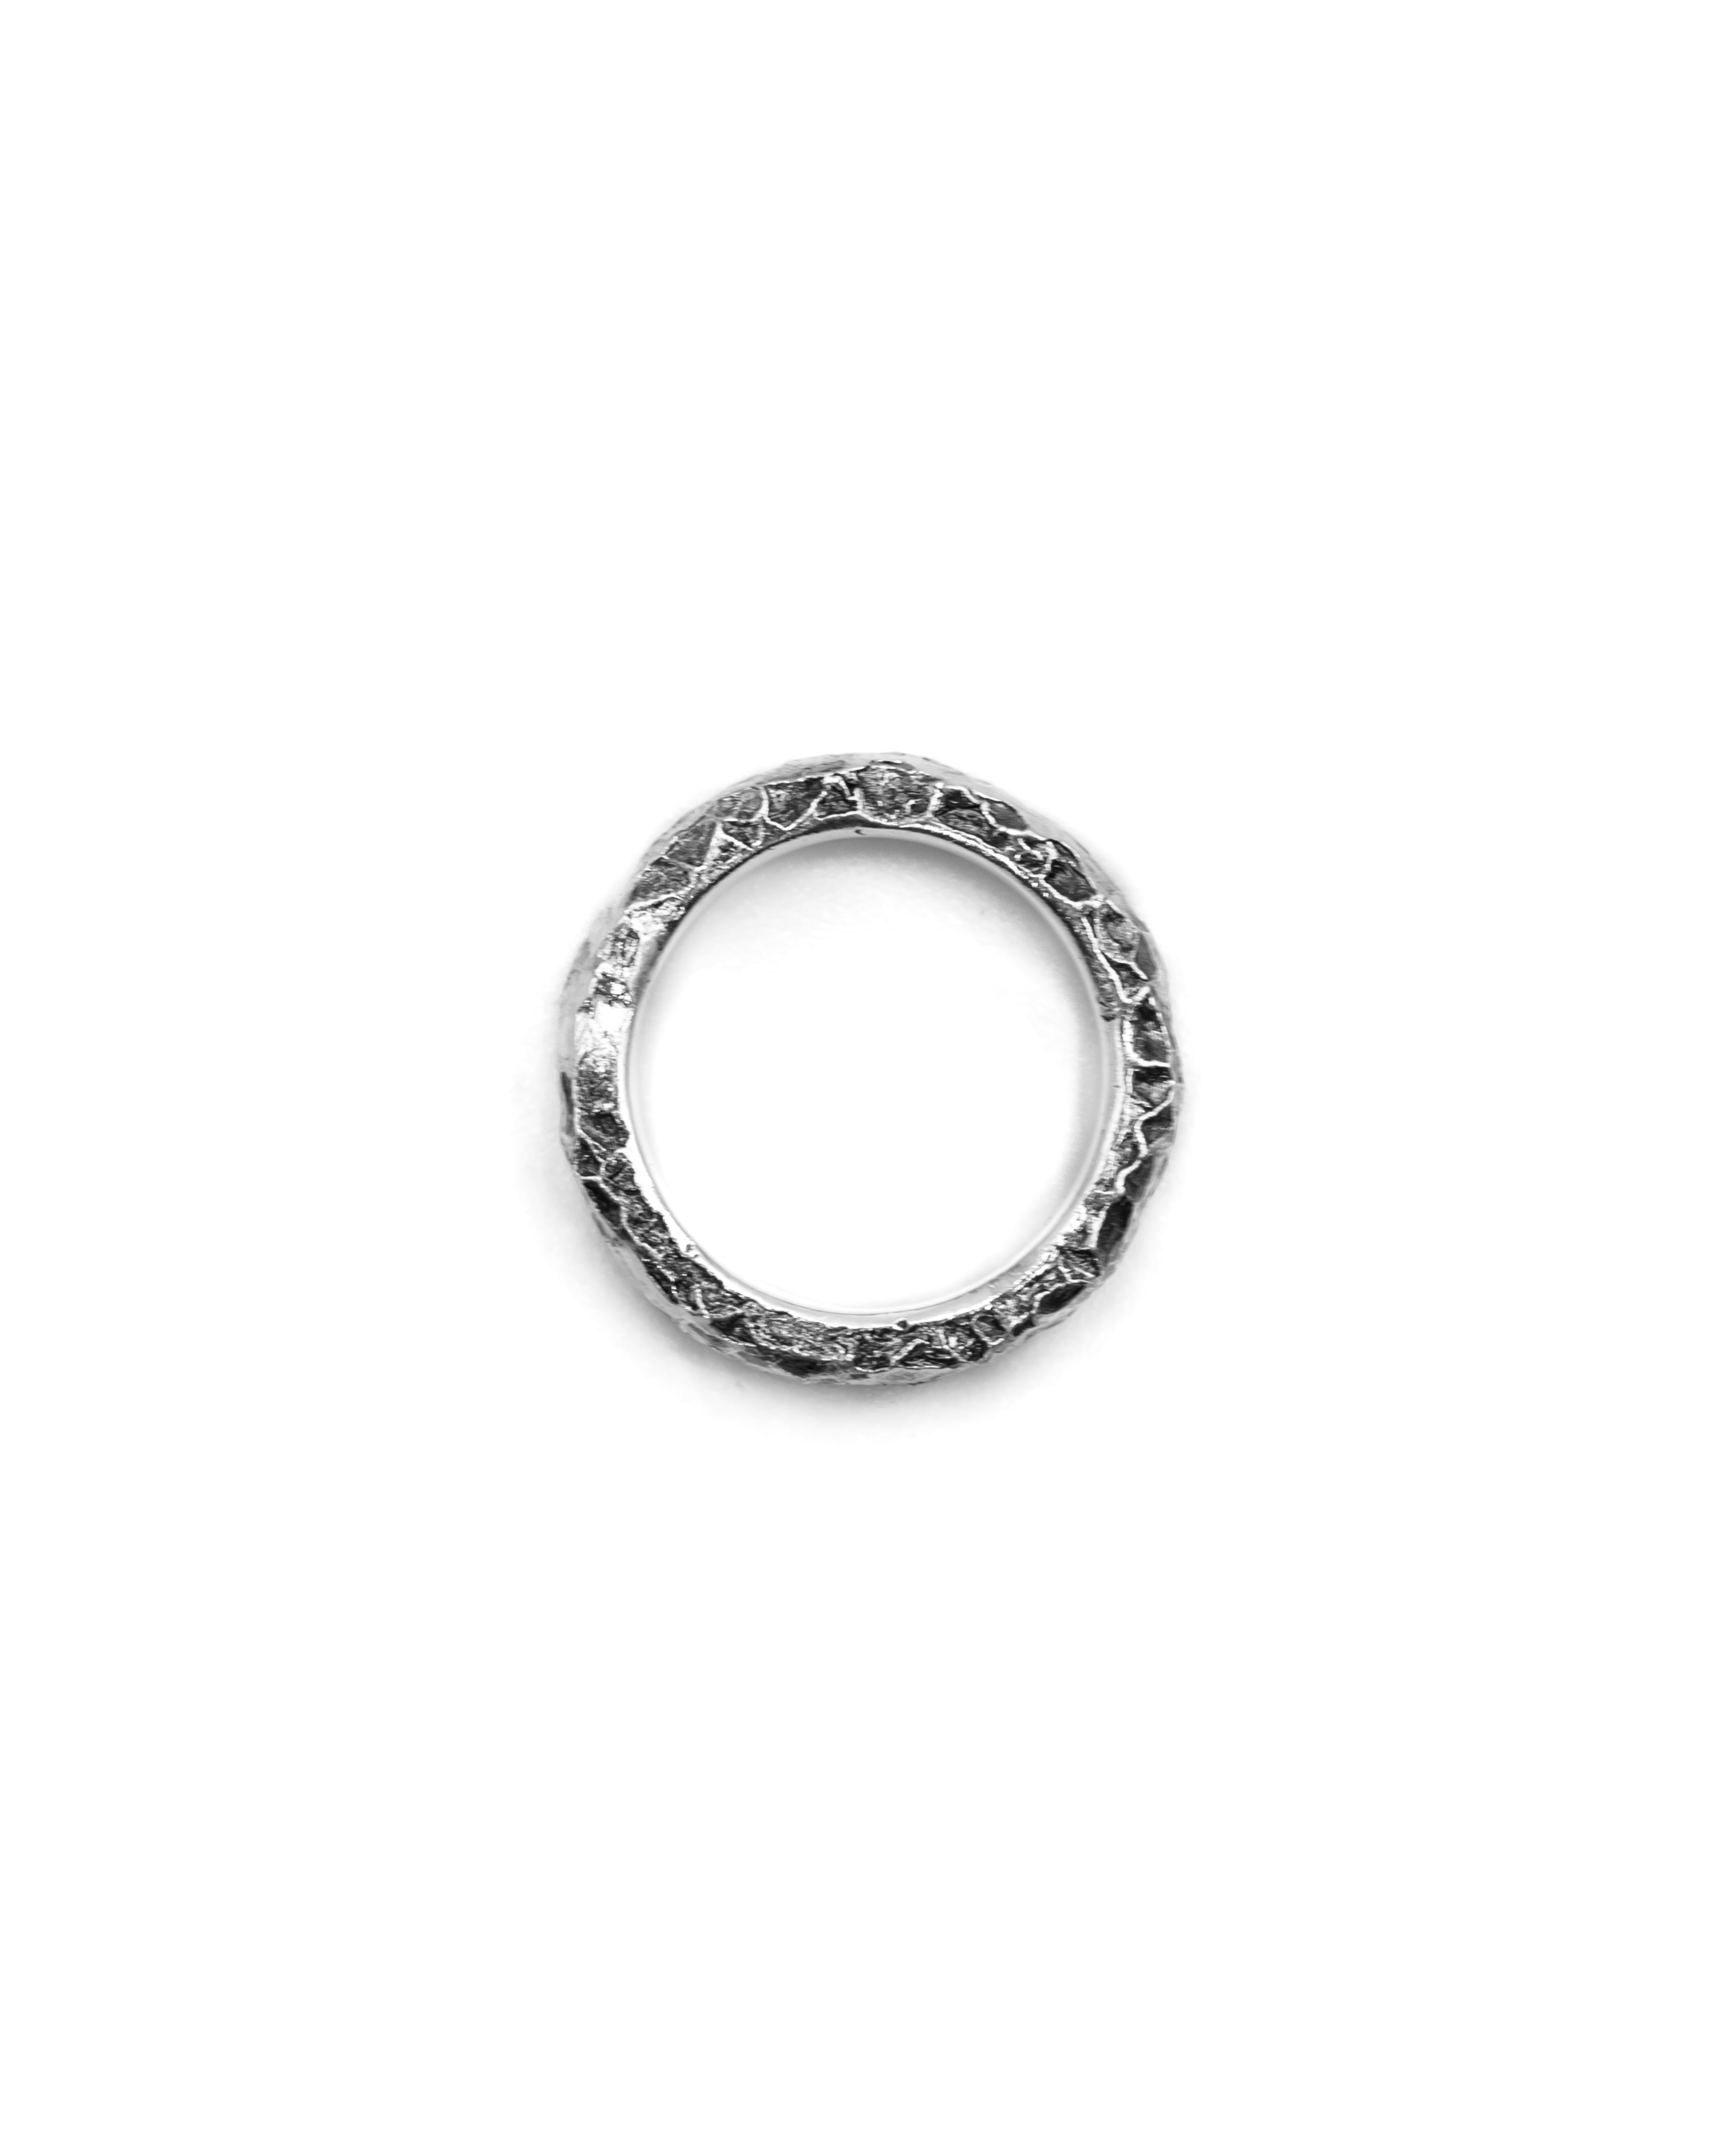 Hammered Ring